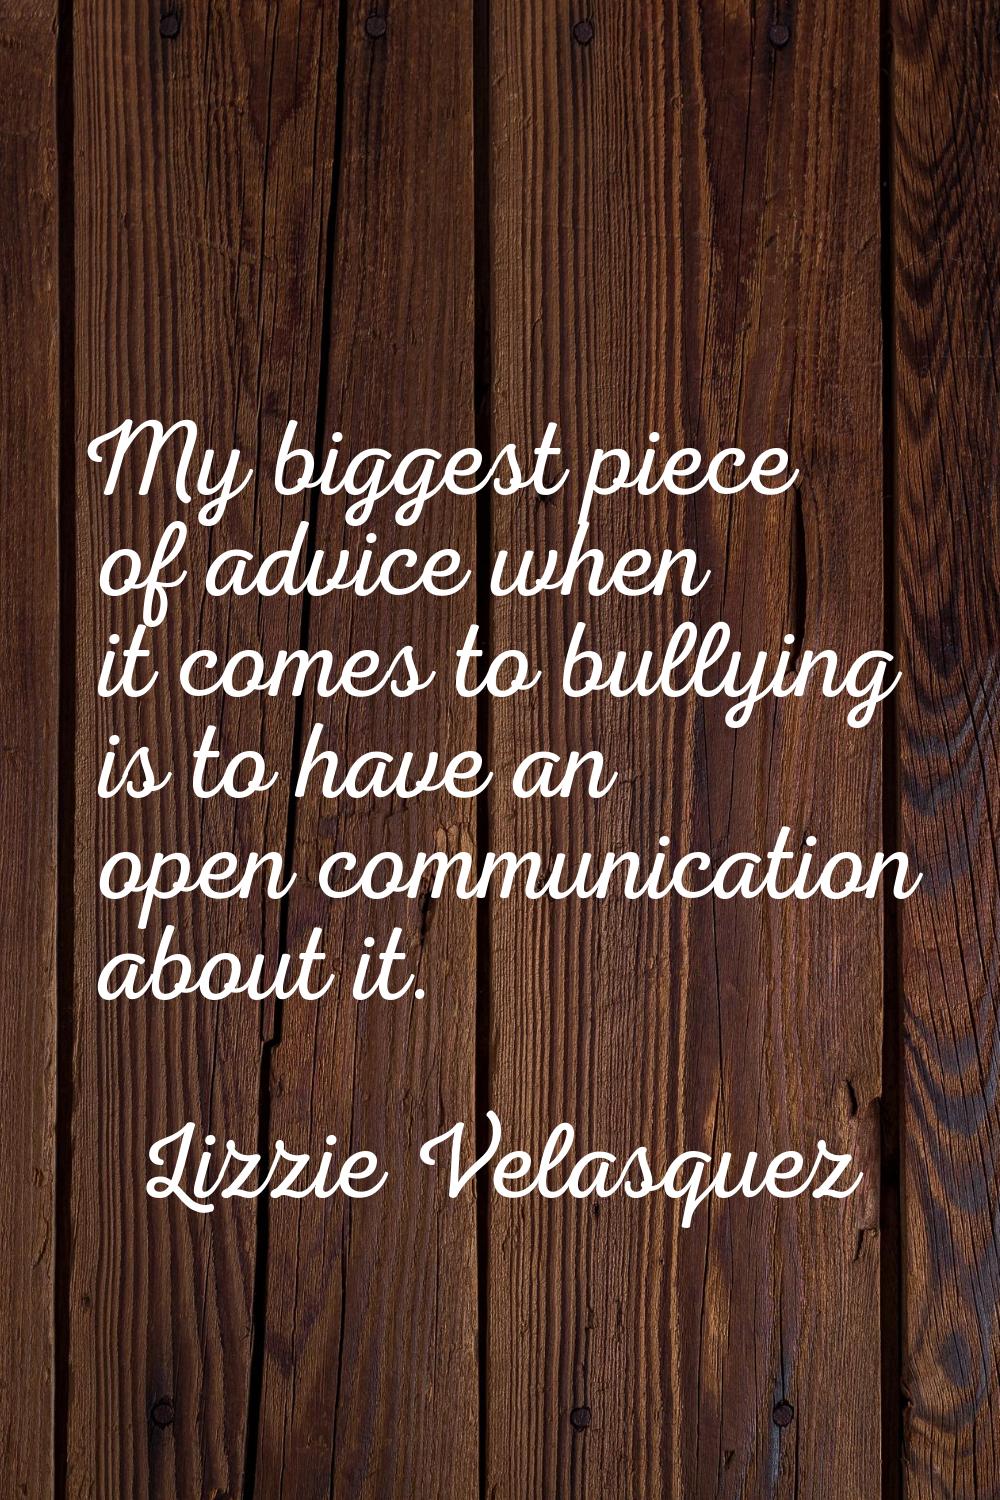 My biggest piece of advice when it comes to bullying is to have an open communication about it.